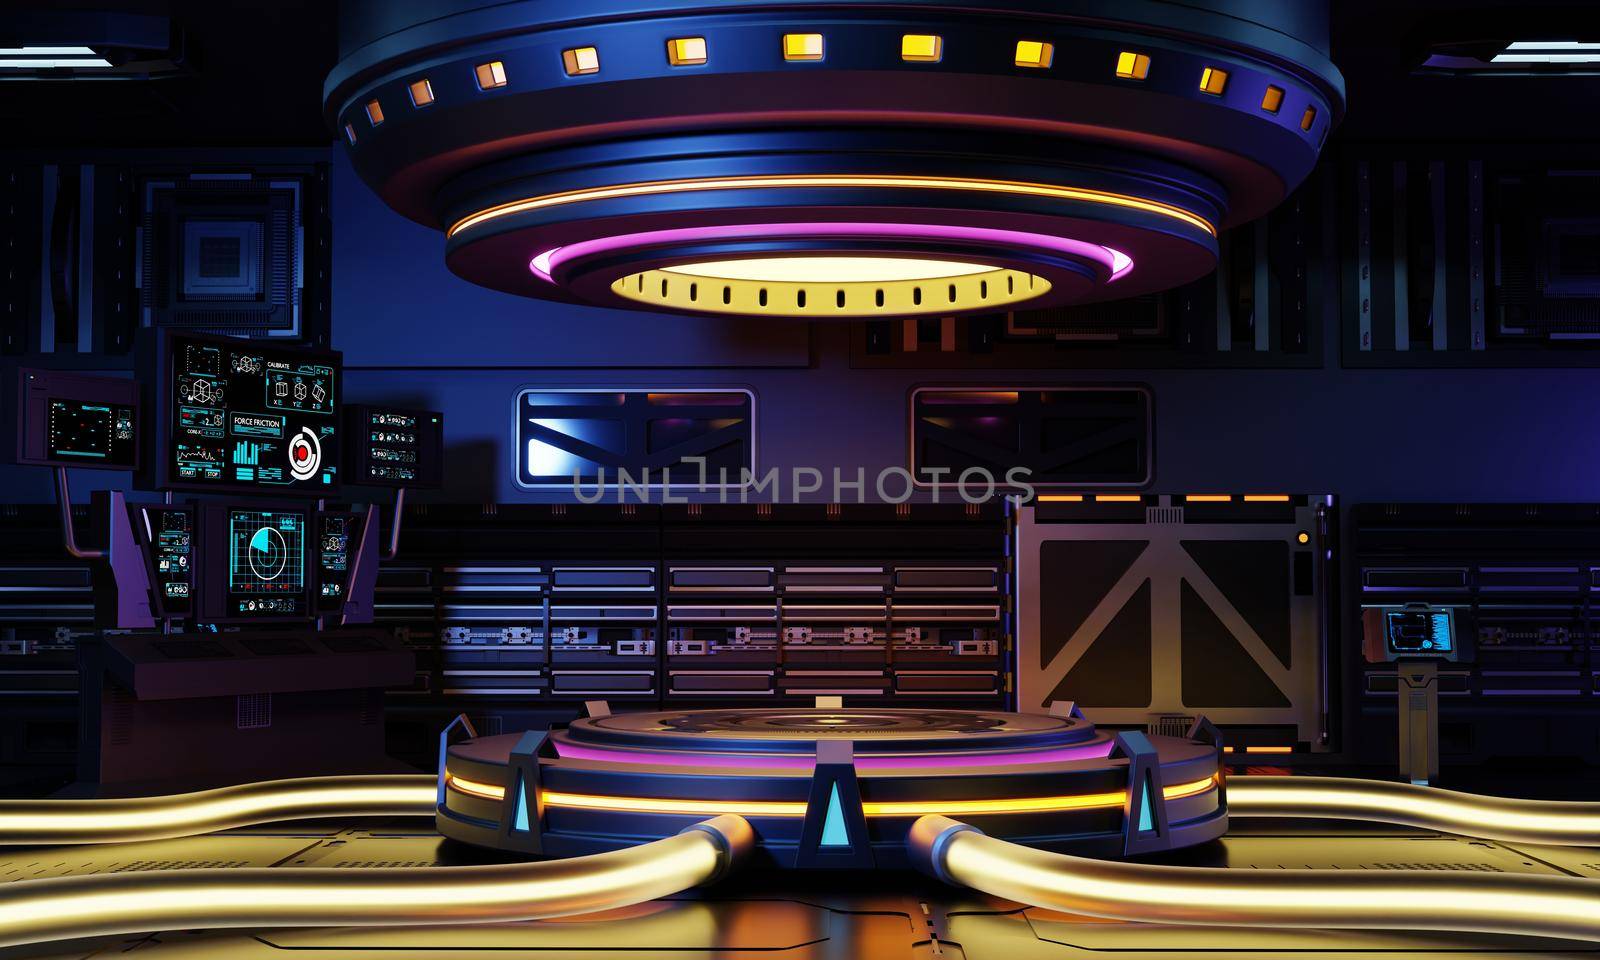 Cyberpunk sci-fi product podium showcase in spaceship with yellow blue purple and pink background. Technology and object concept. 3D illustration rendering by MiniStocker